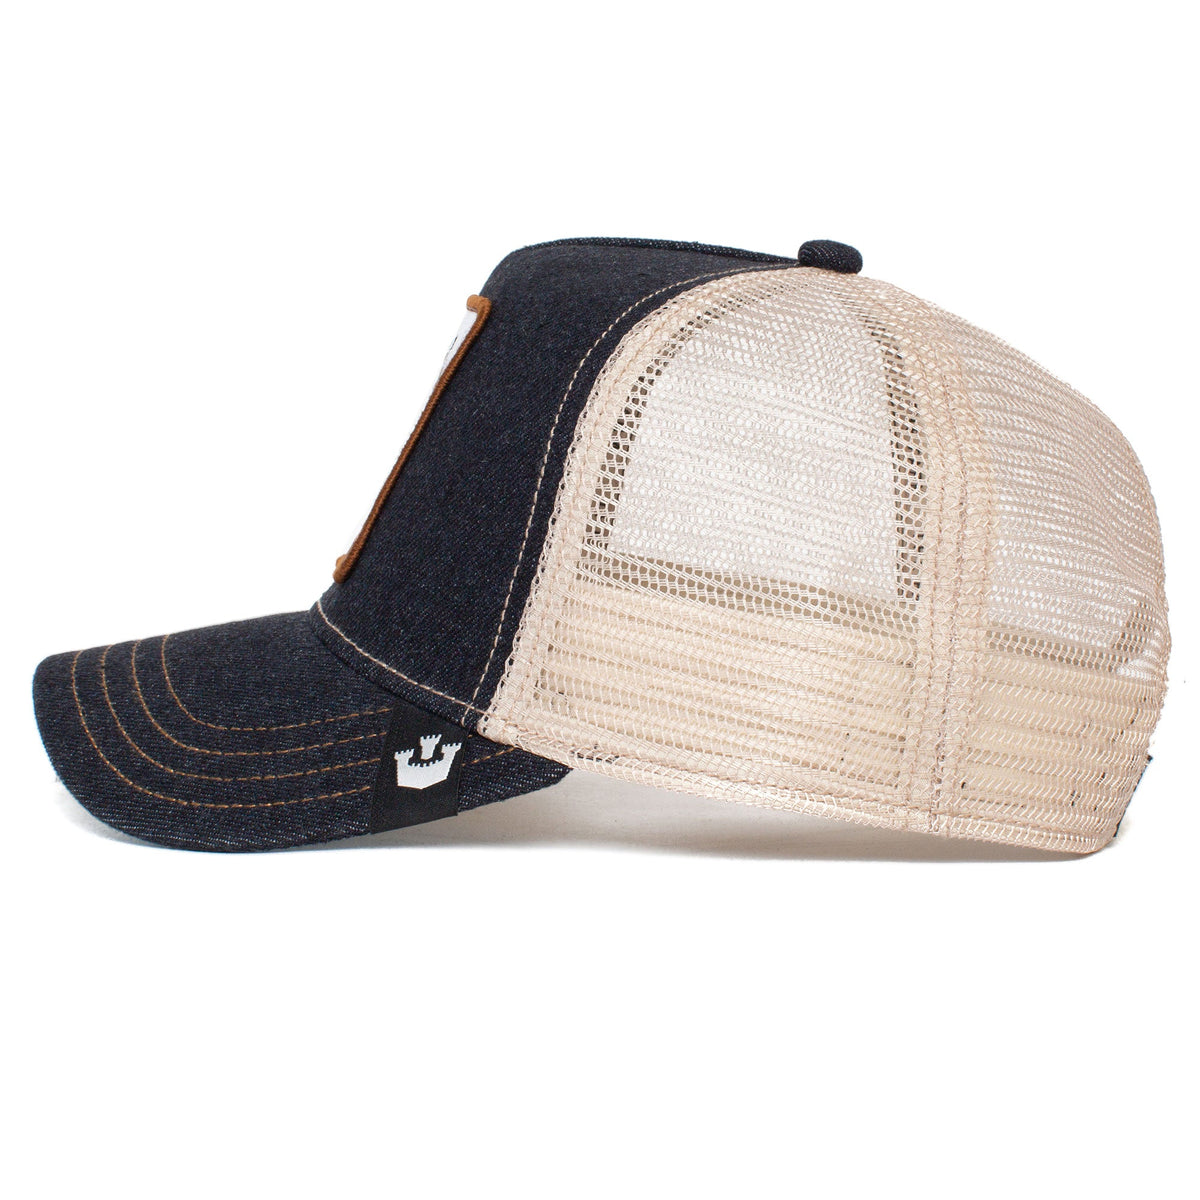 The GOAT - The Farm by Goorin Bros.® Official Trucker Hat